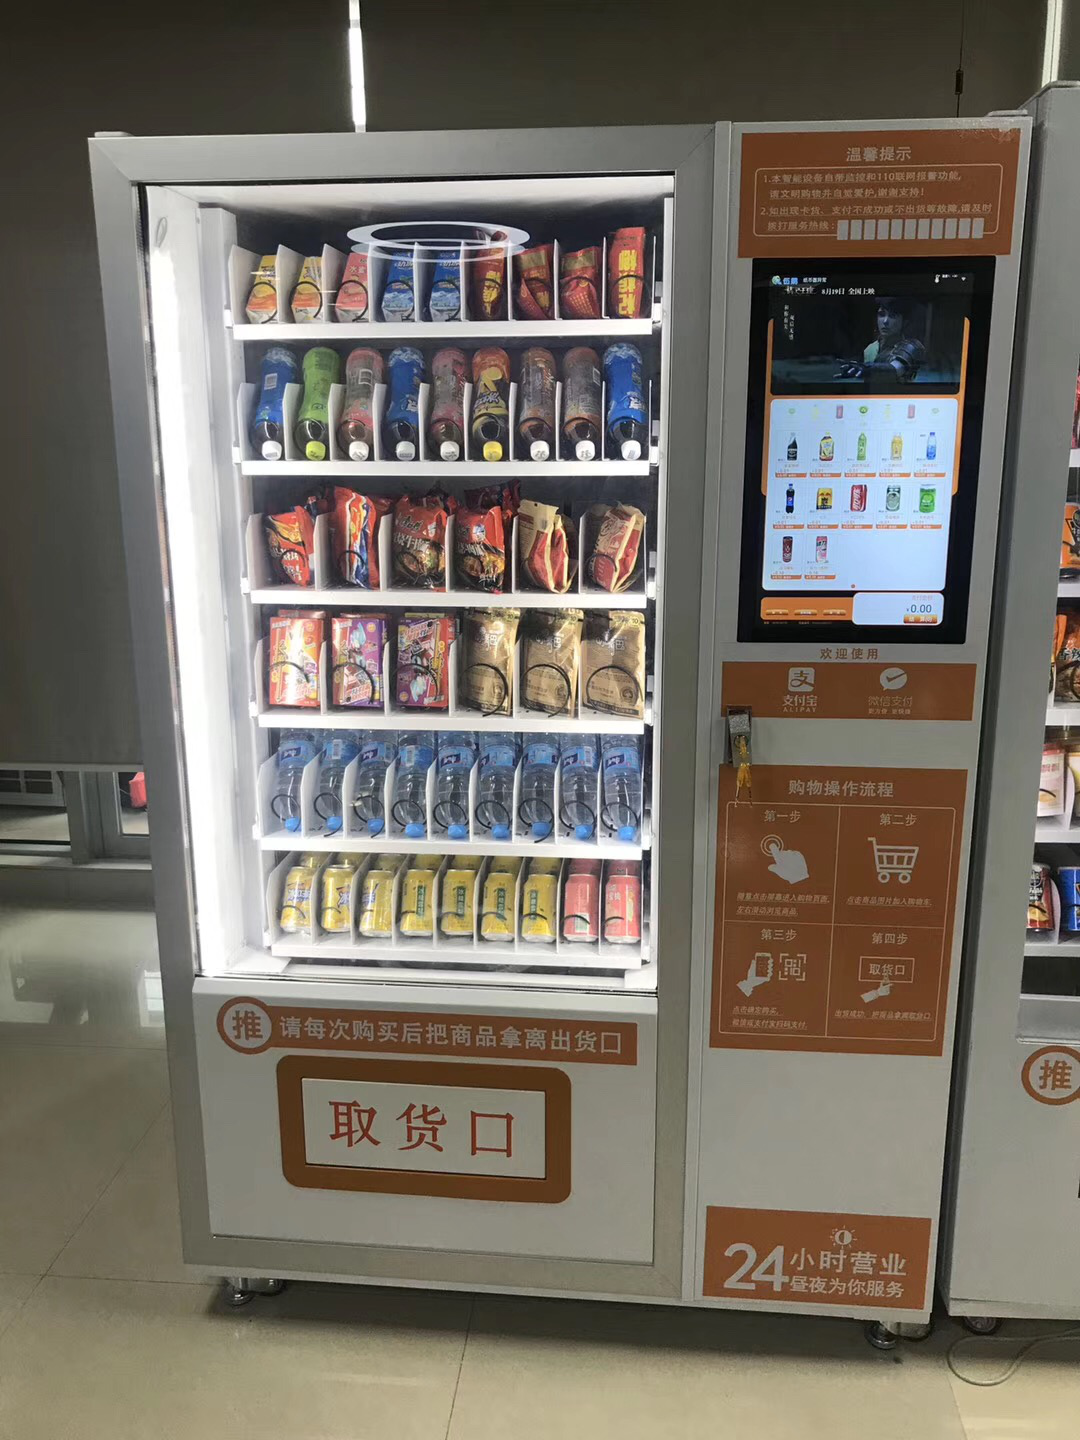 Vending machines are becoming more and more popular